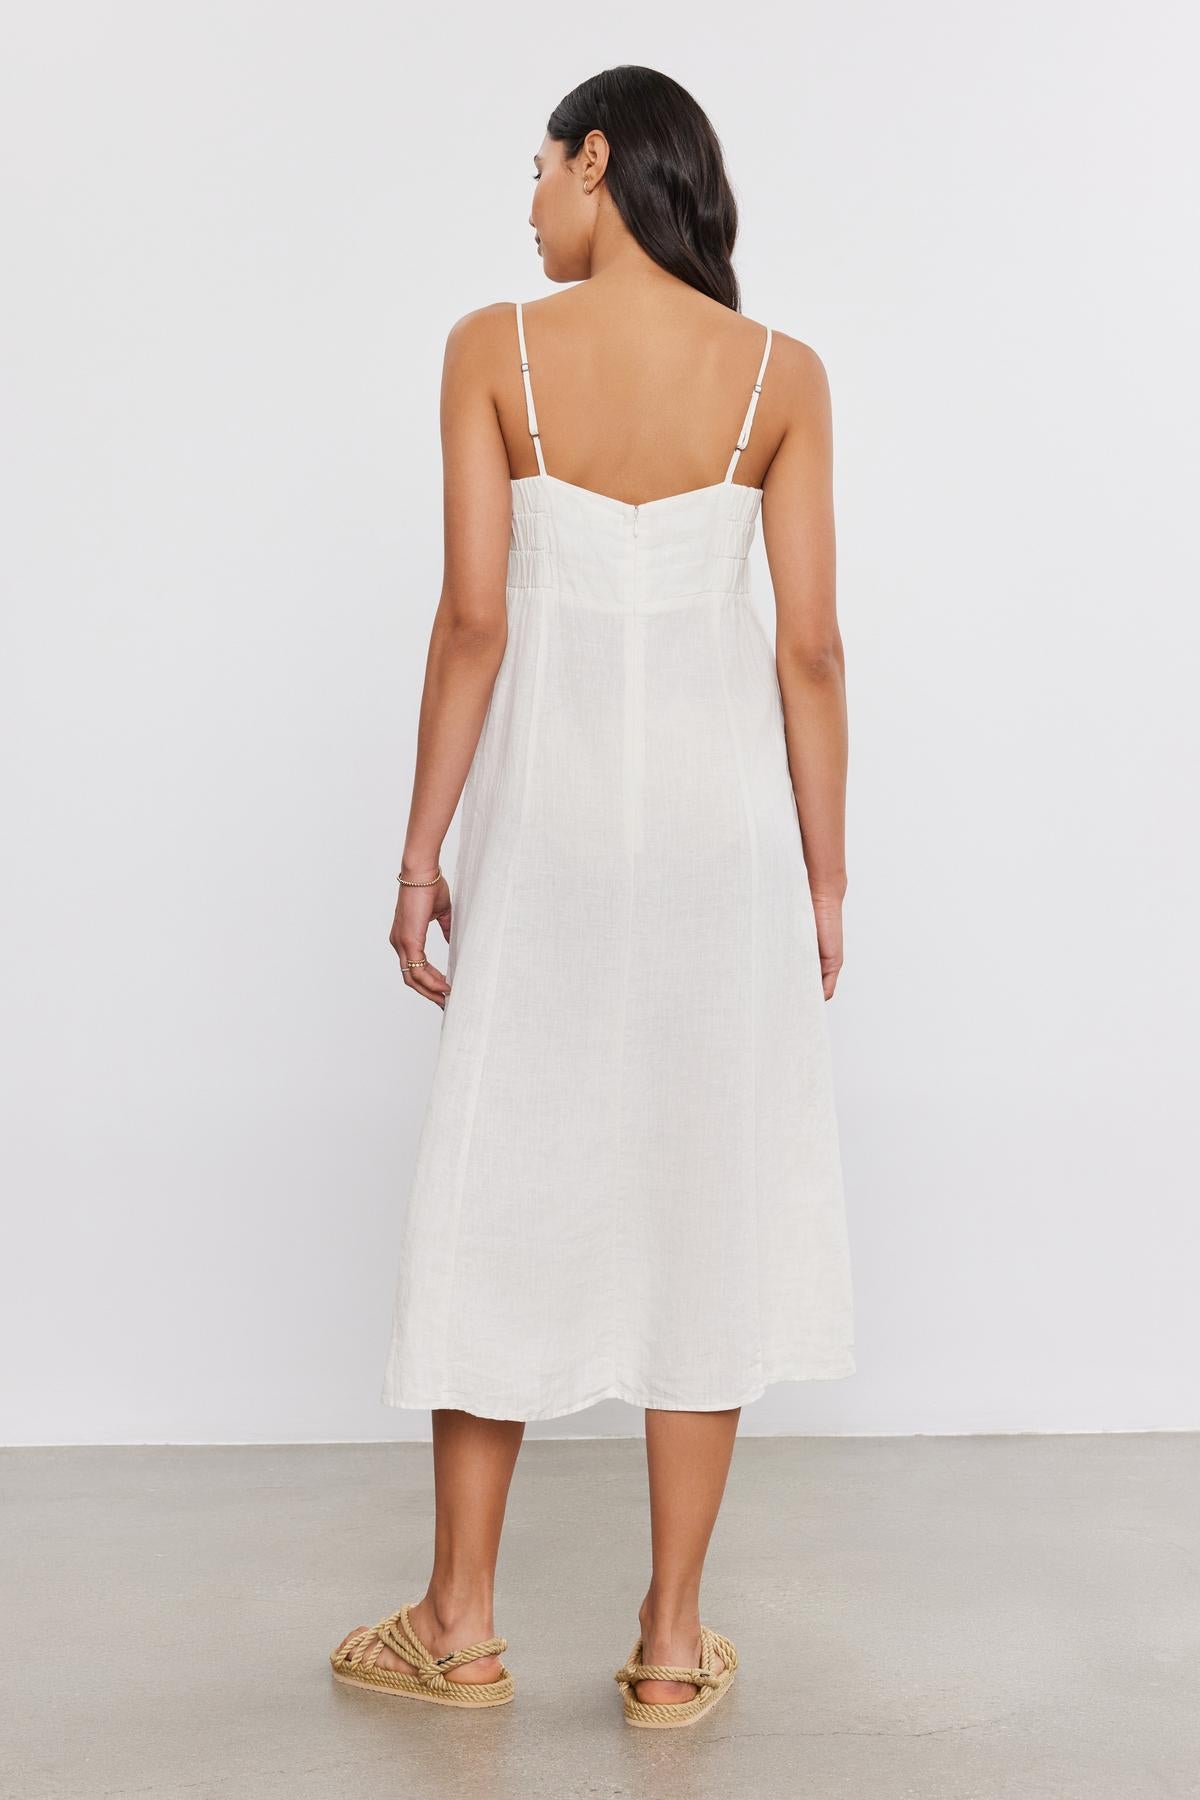 A woman standing with her back to the camera, wearing a STEPHIE LINEN DRESS by Velvet by Graham & Spencer and woven slip-on shoes, against a plain background.-36752945021121